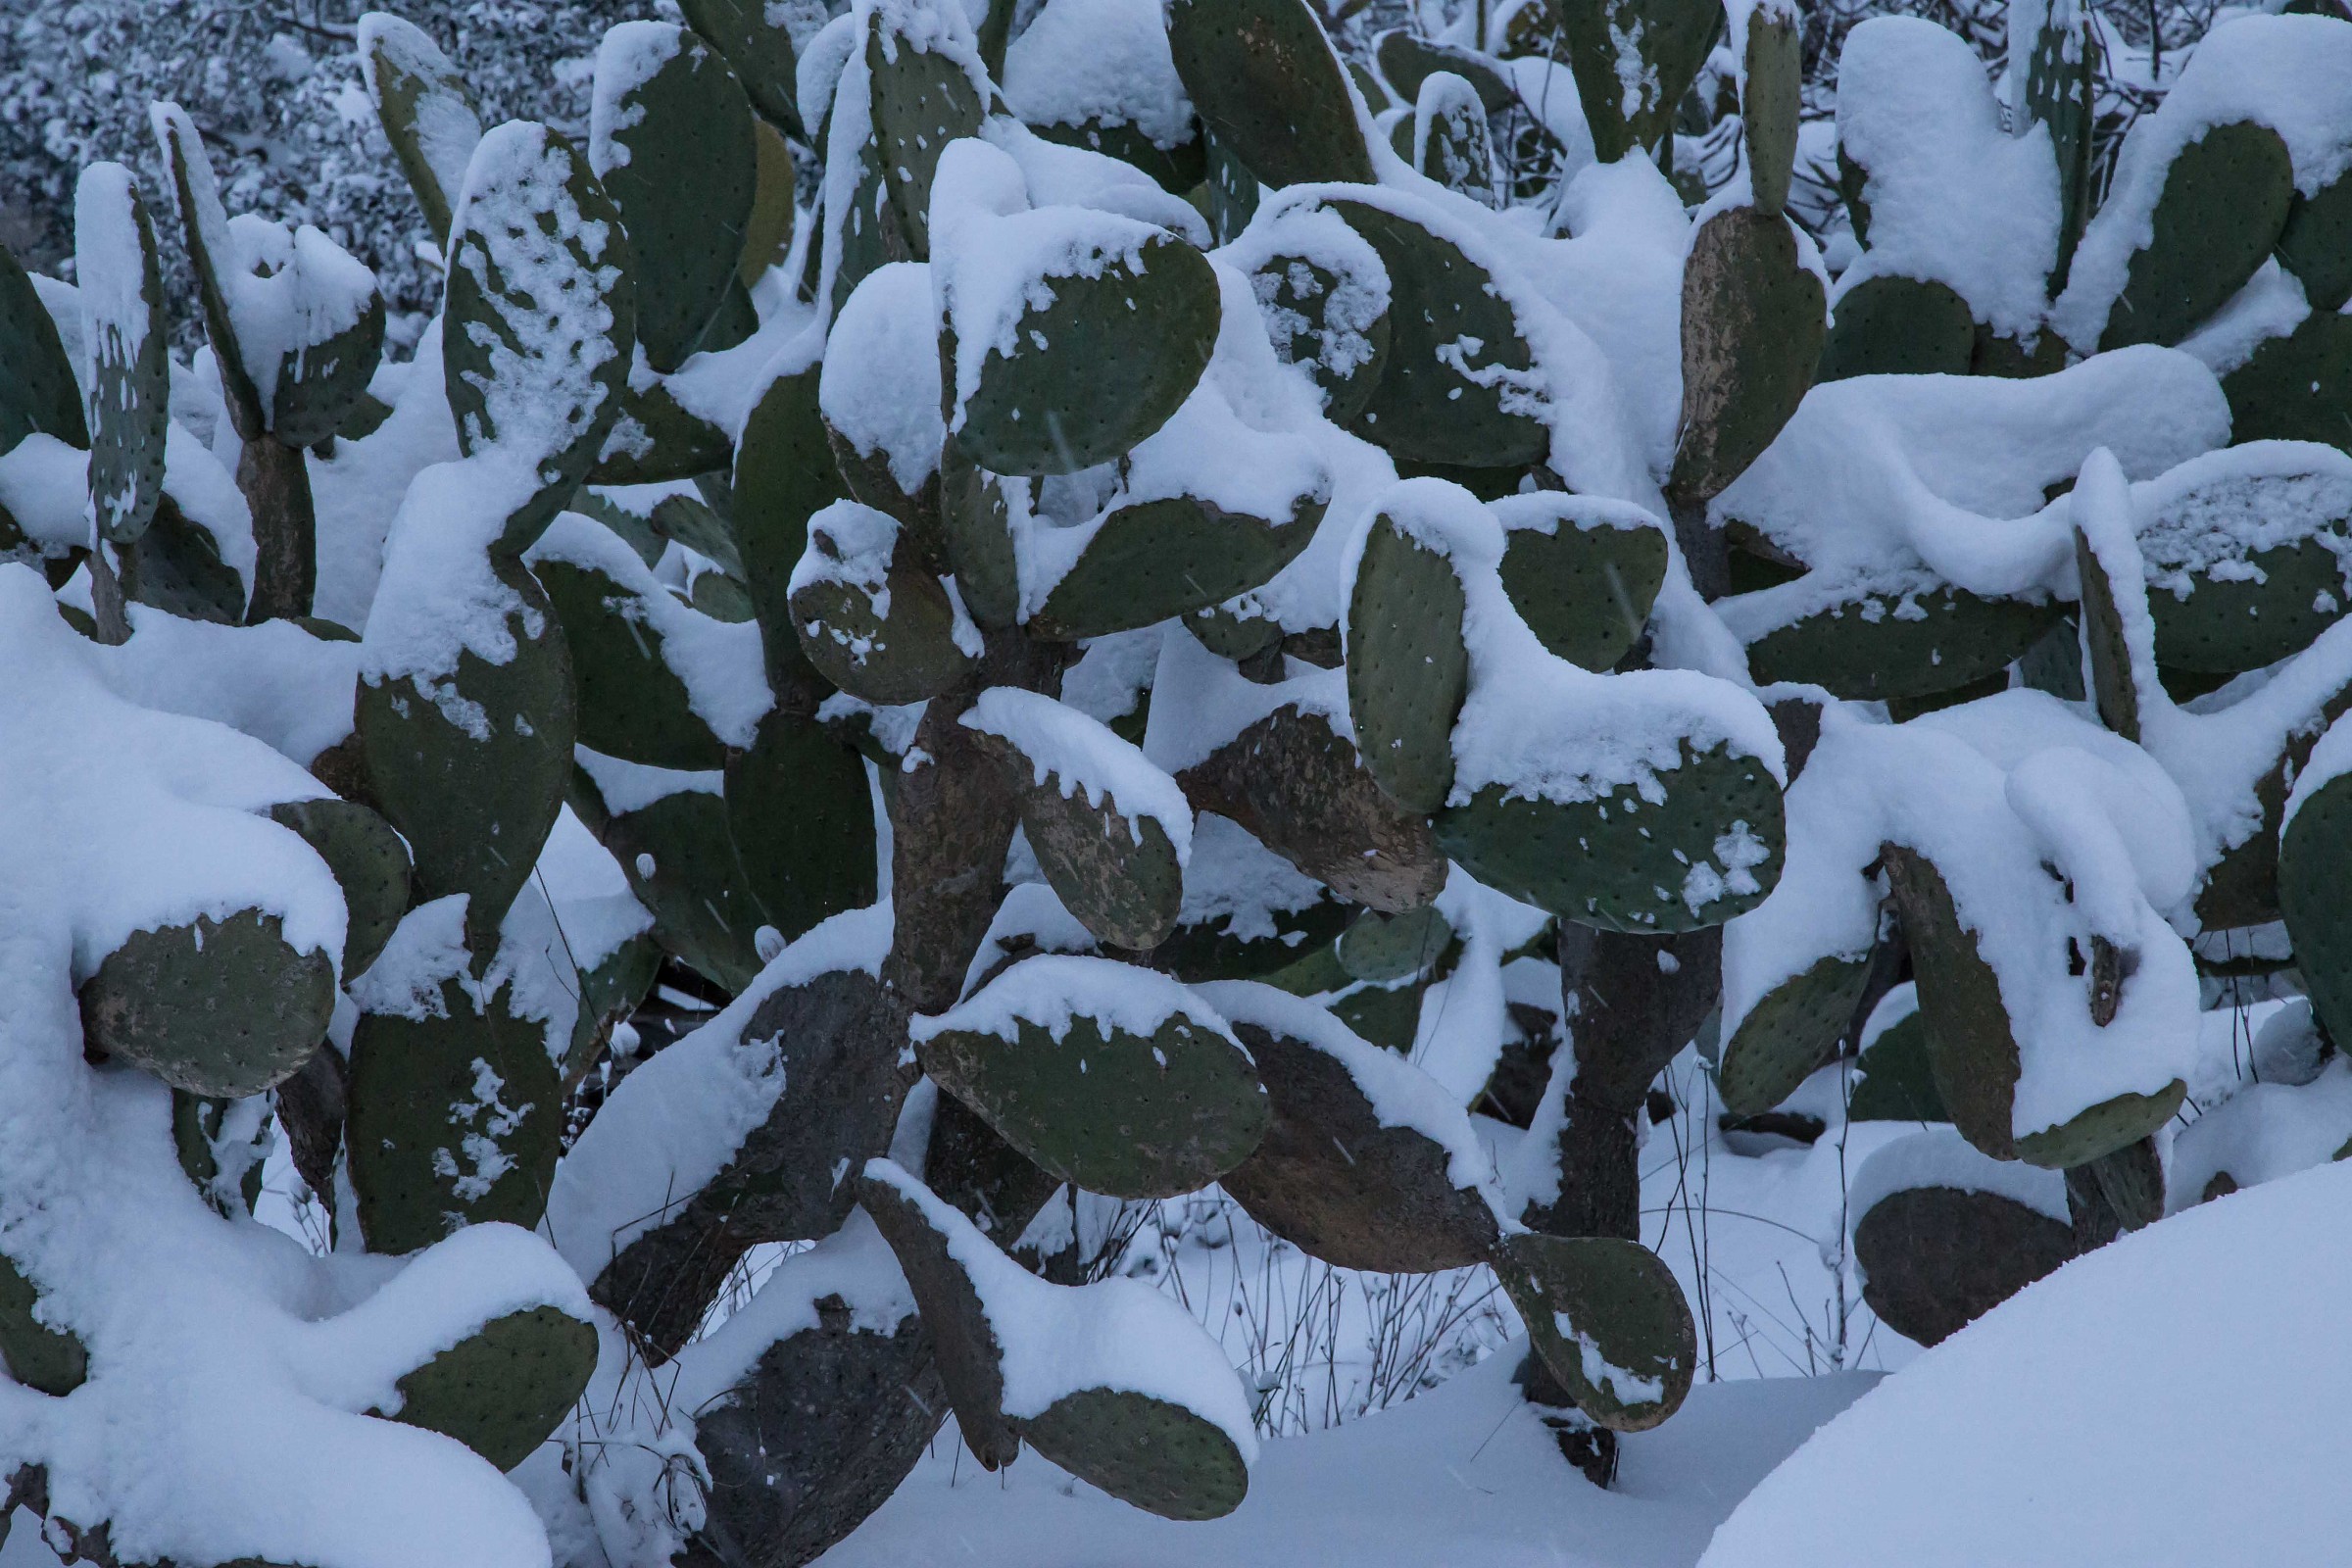 prickly pears under snow after 28 years...